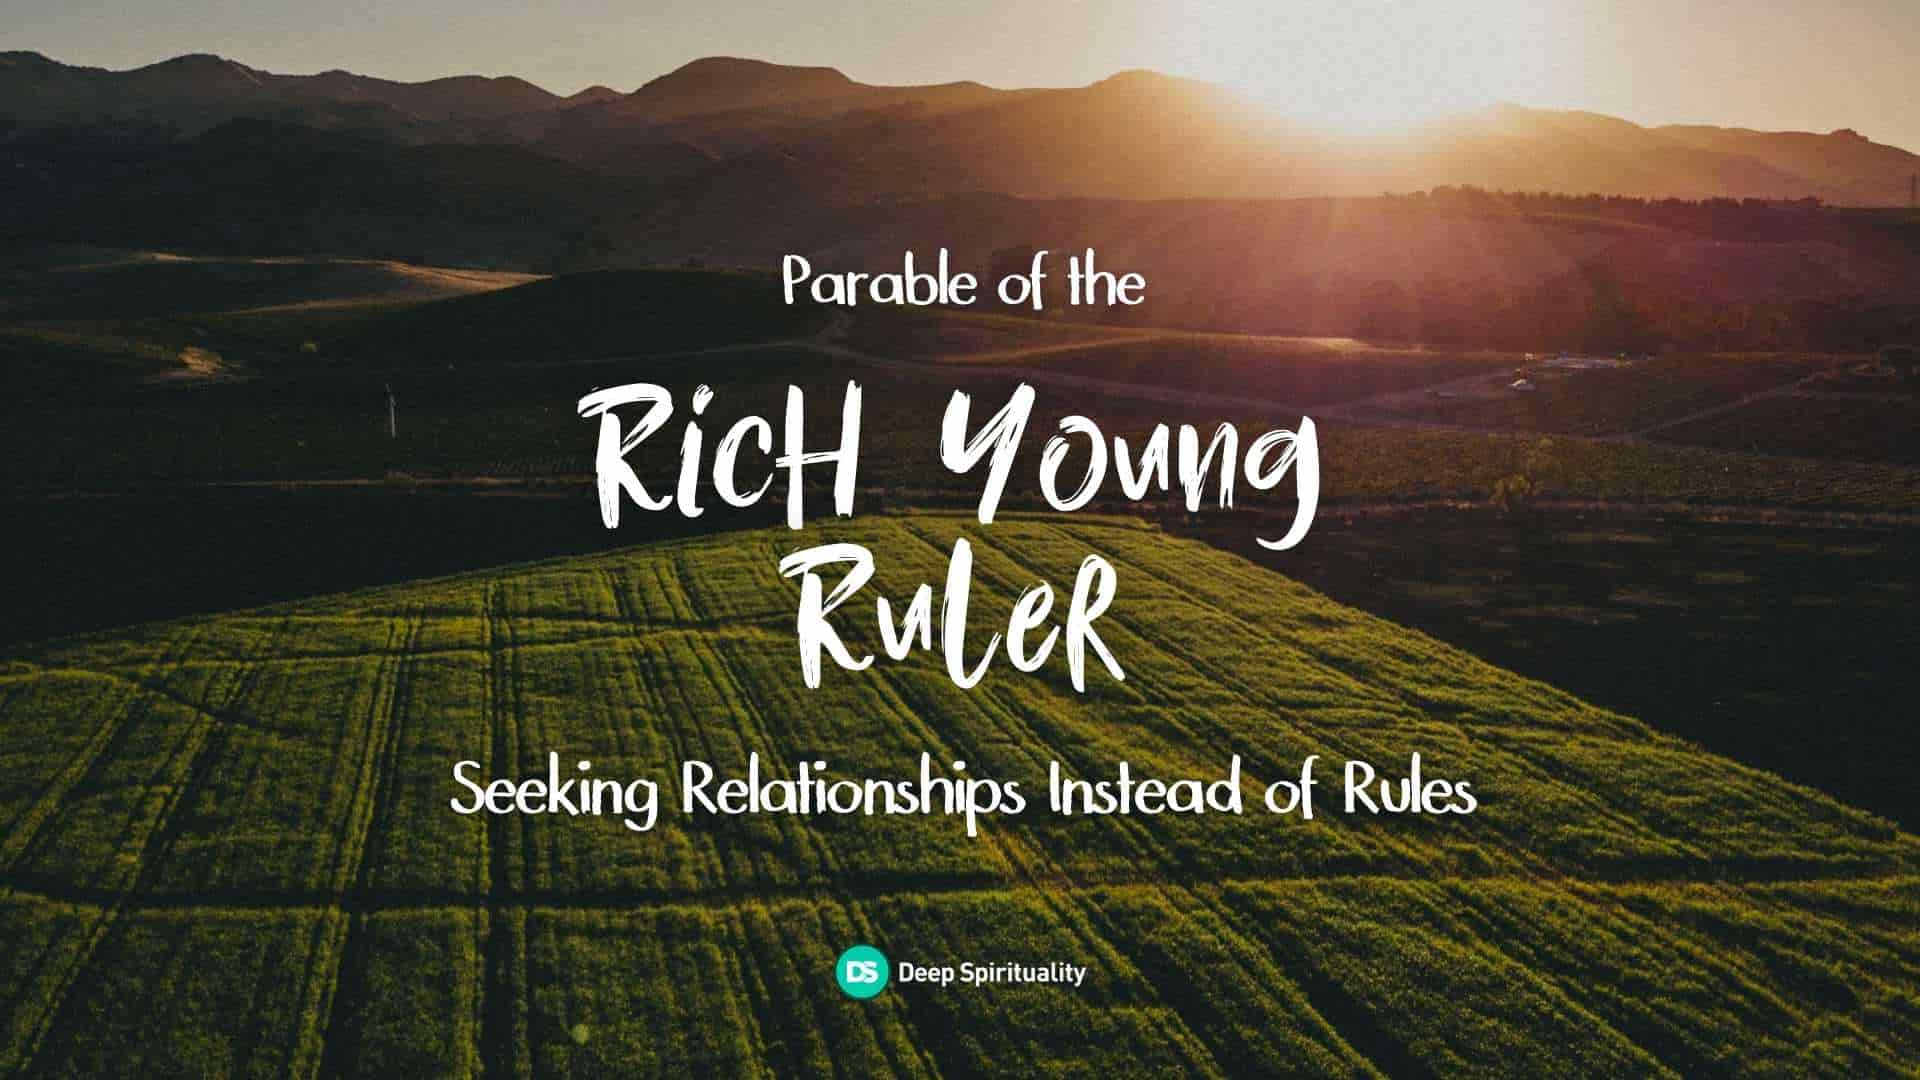 The Rich Young Ruler: How to Stop Seeing Rules and Start Seeing Relationship 127